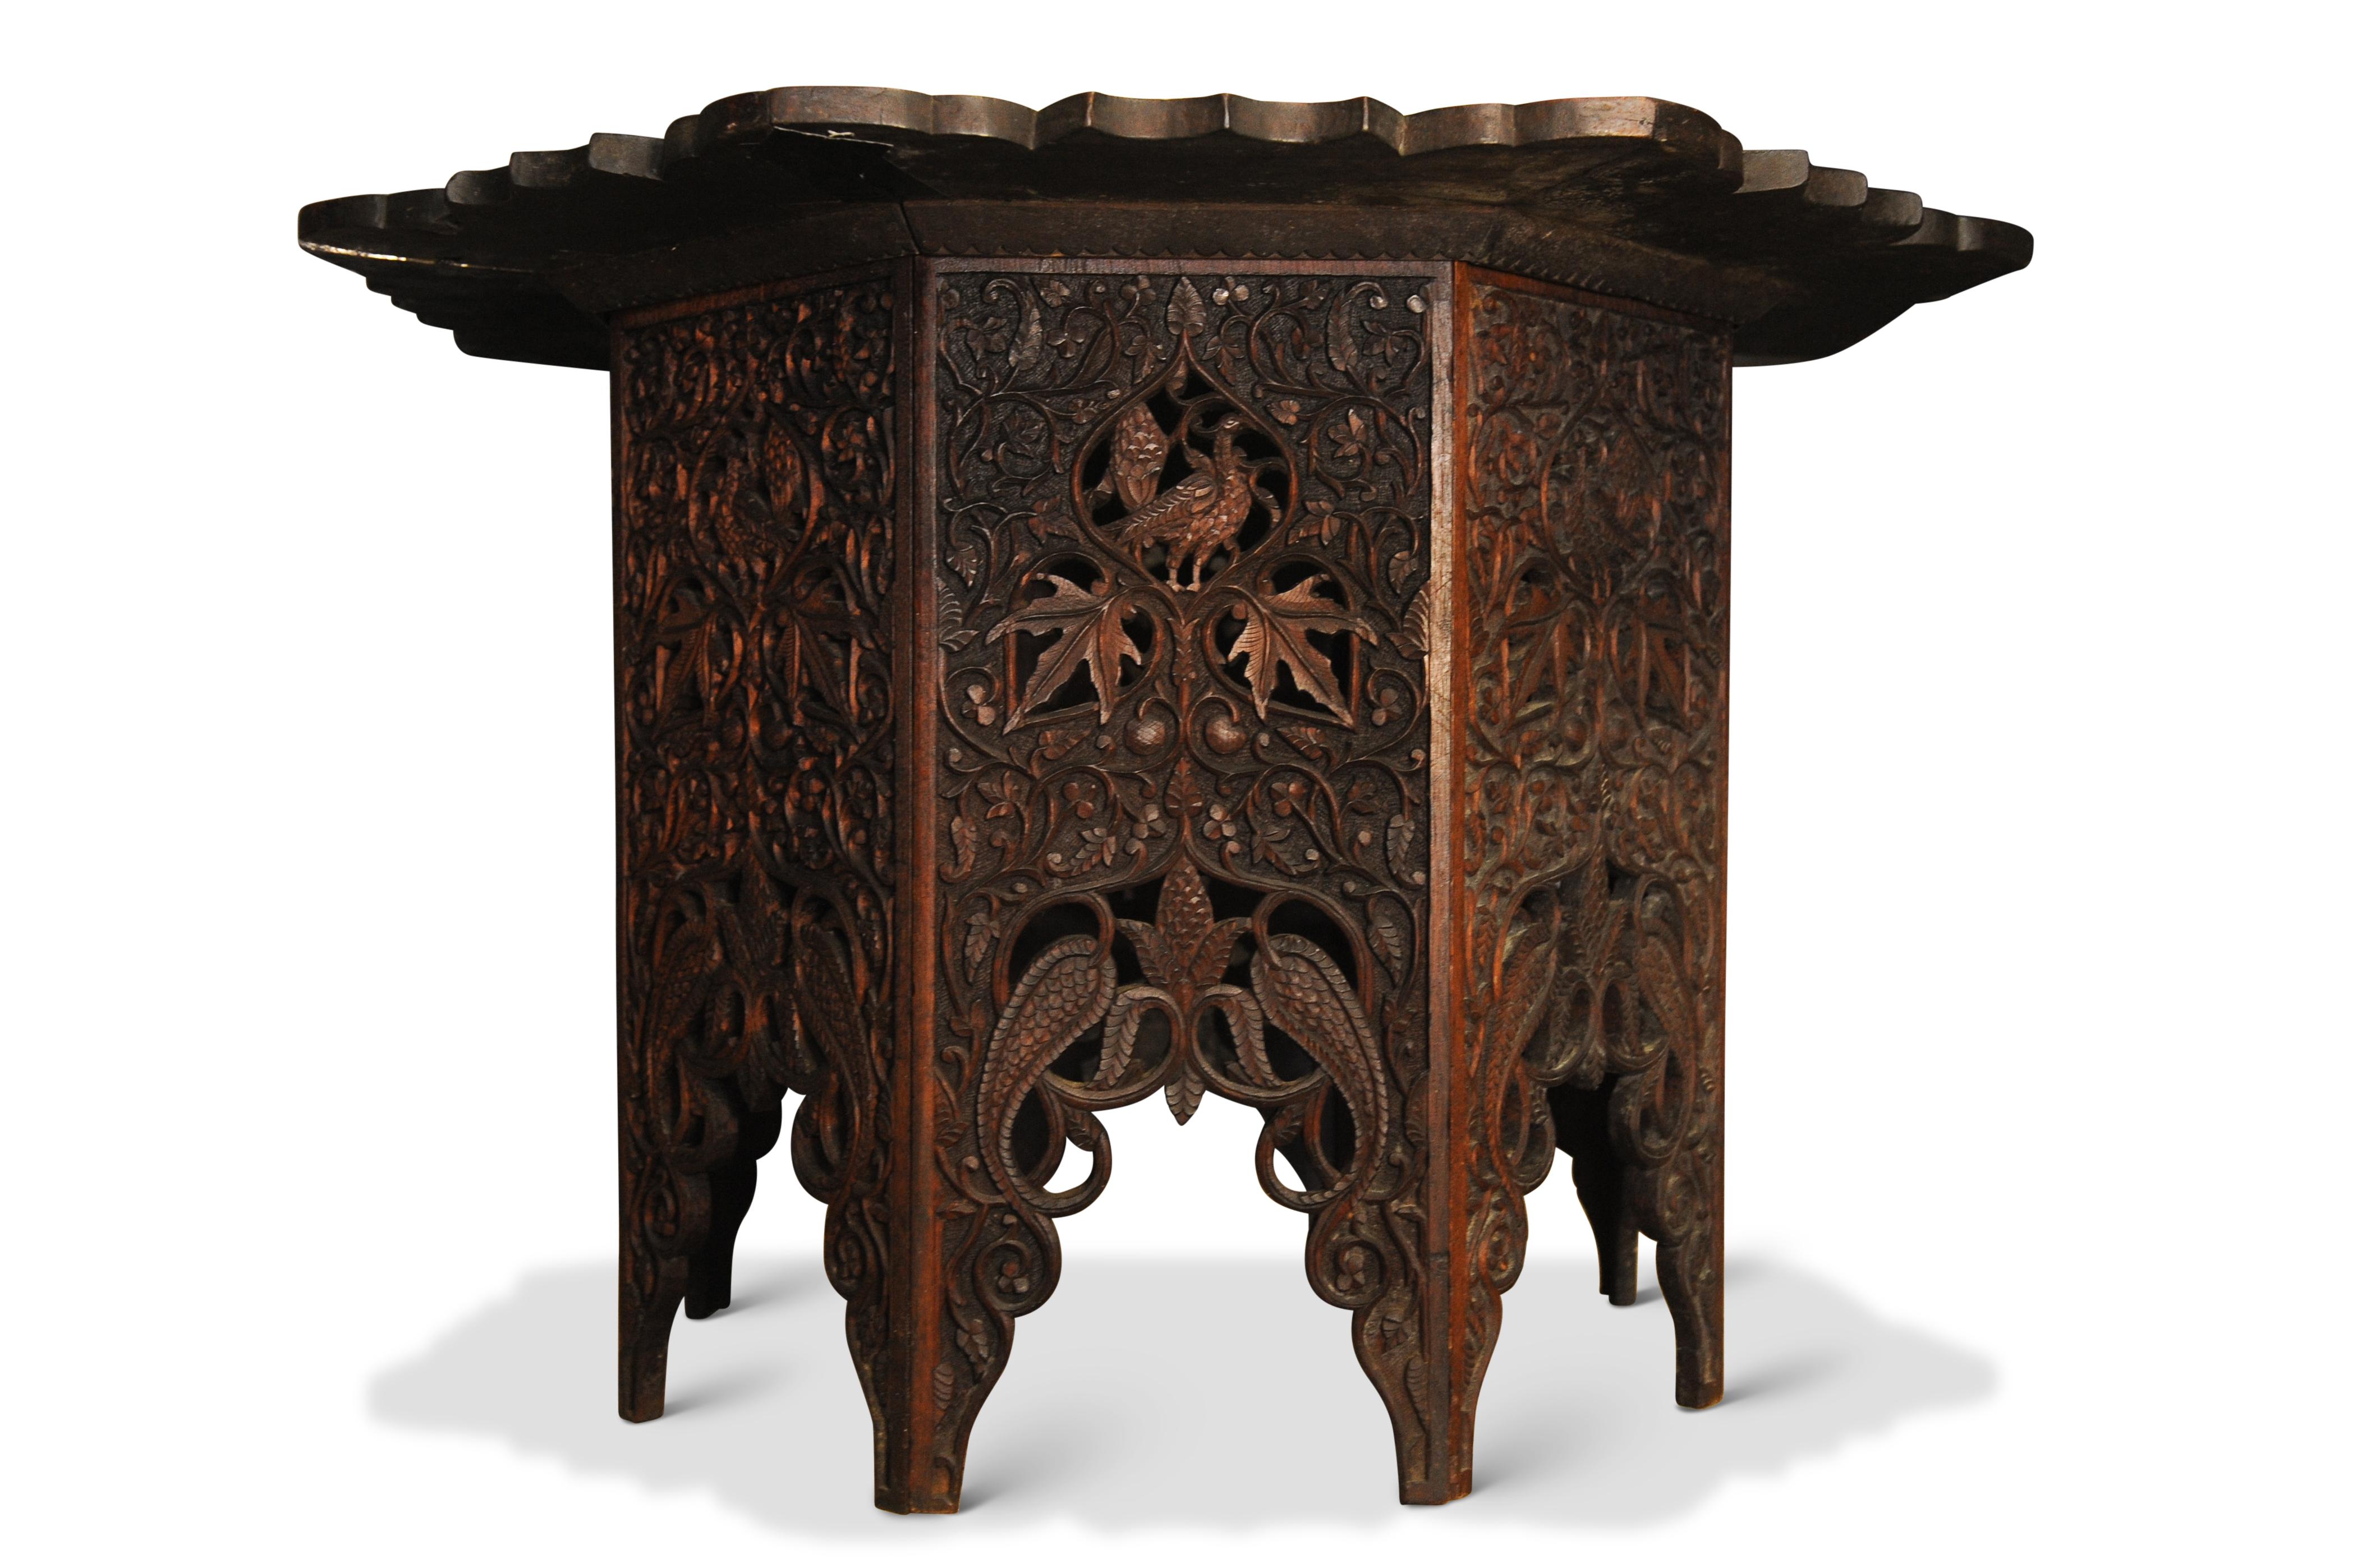 Tibetan Ornately Carved Asian Hardwood and Hammered Brass Table For Sale